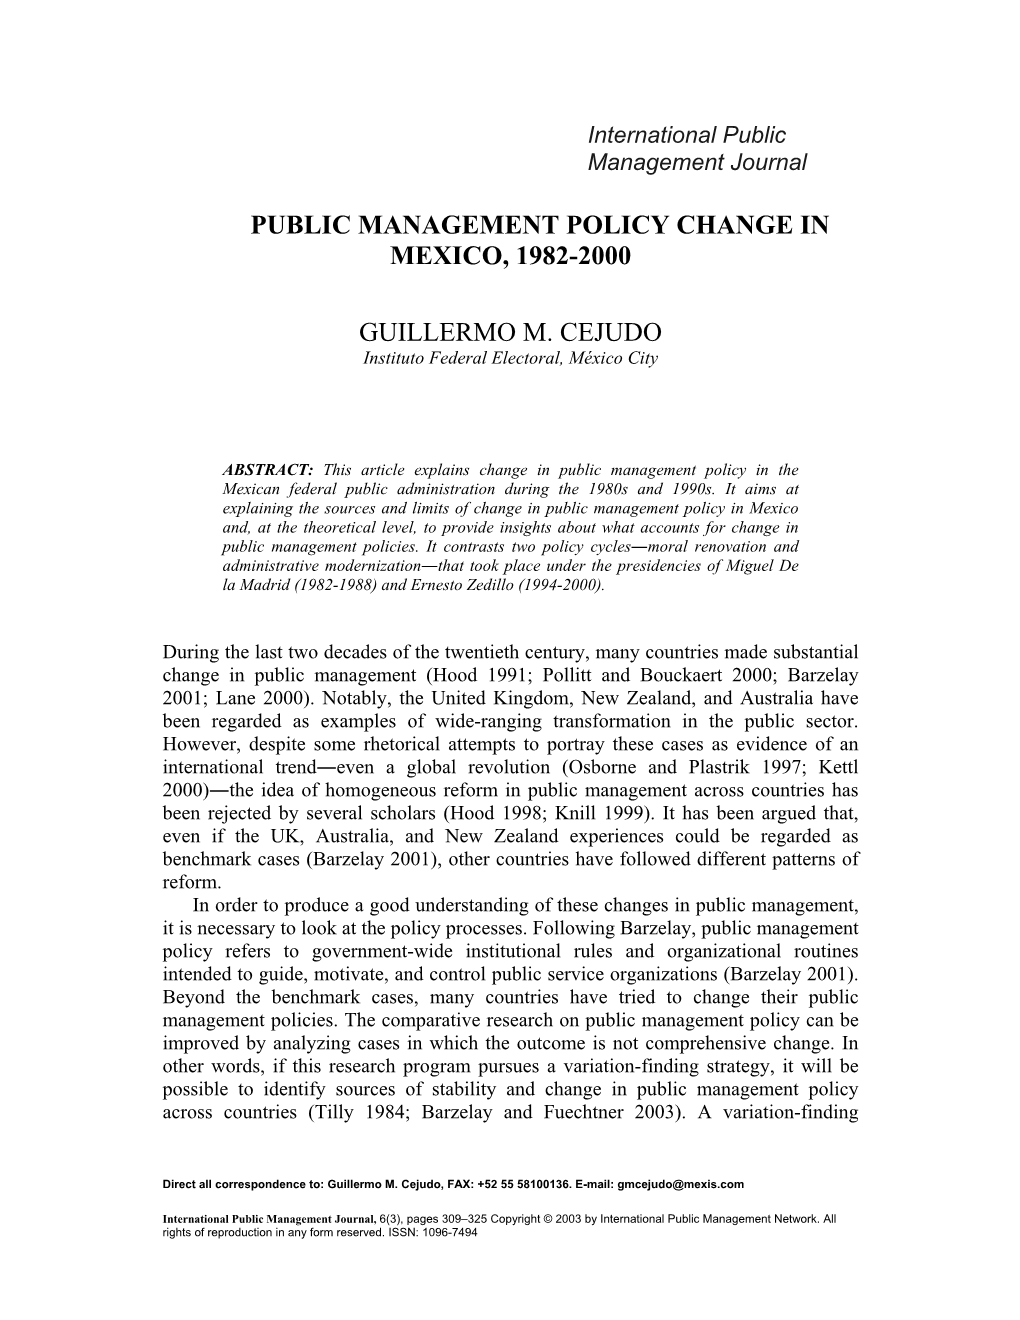 Public Management Policy Change in Mexico, 1982-2000